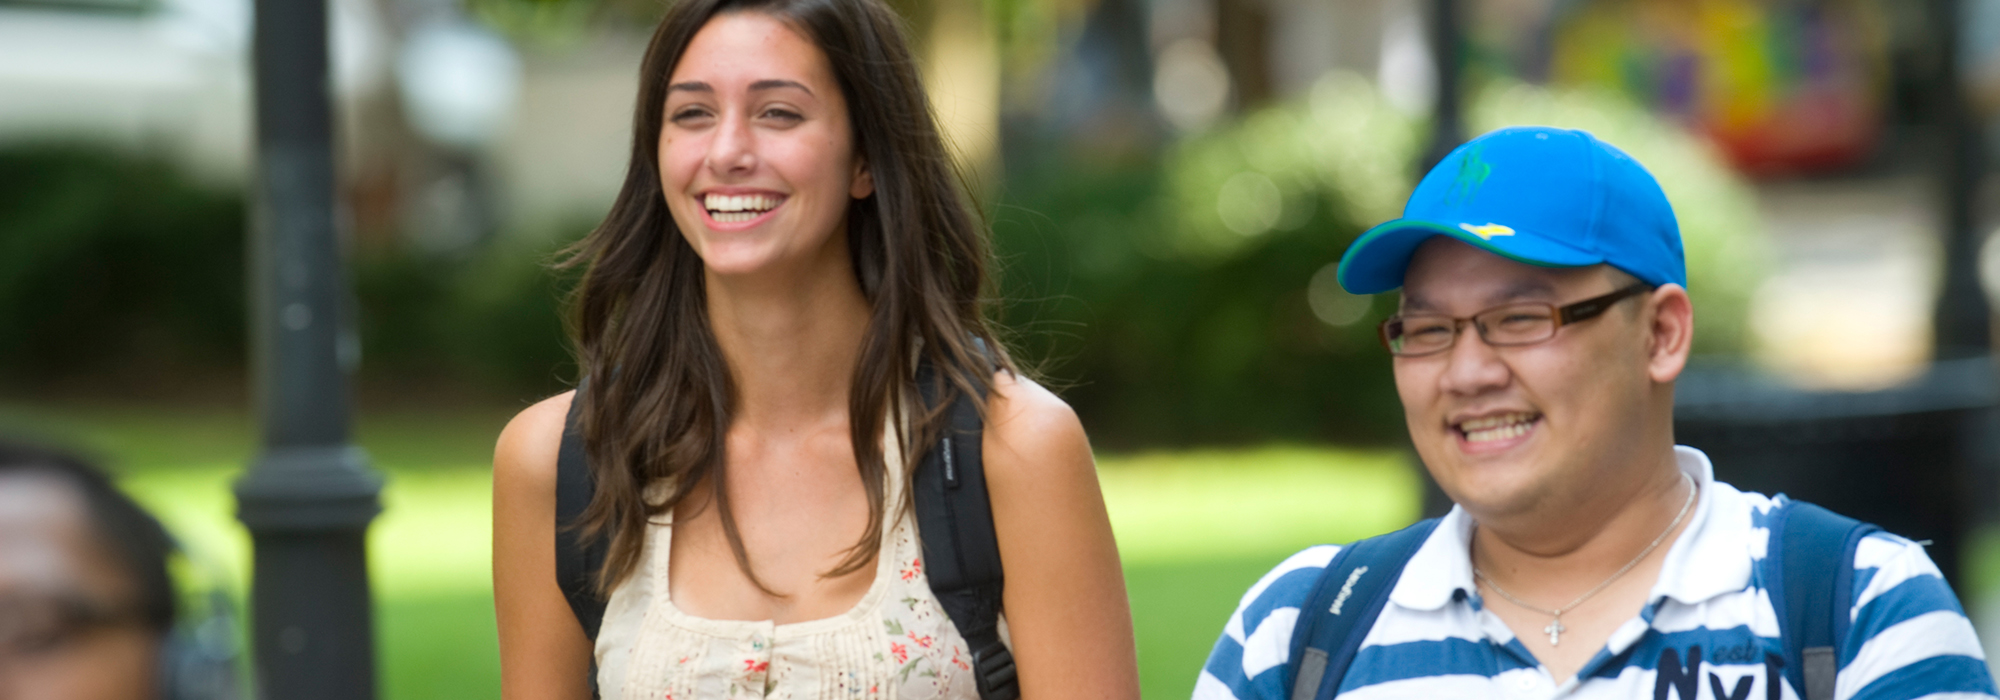 Two smiling students walking to class